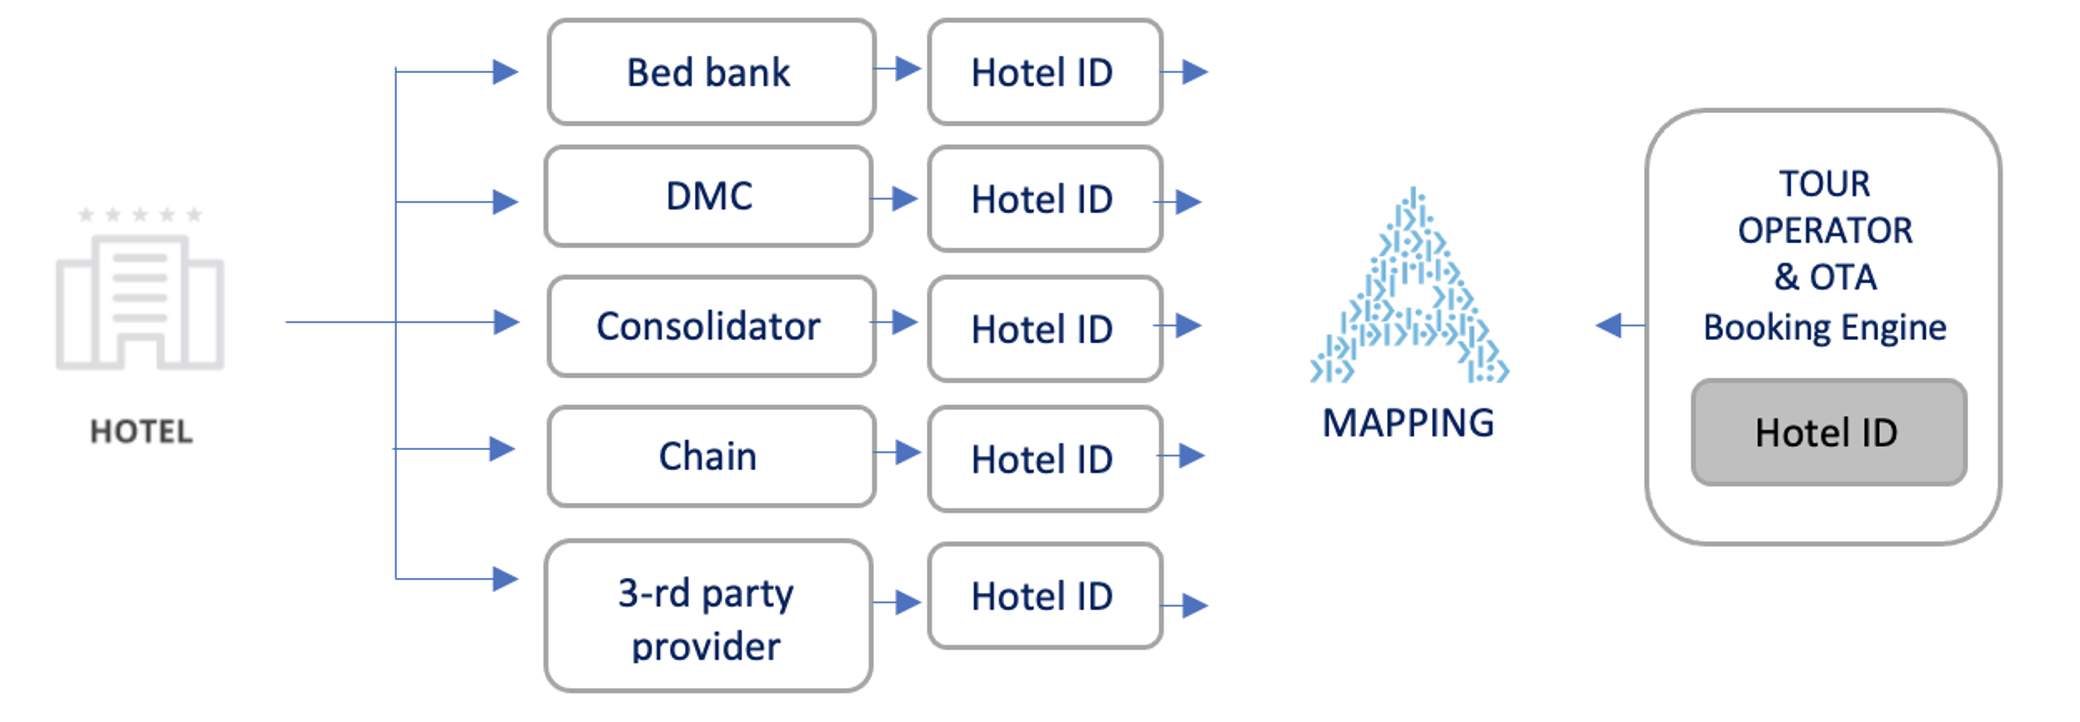 Mapping Hotel Diagram 